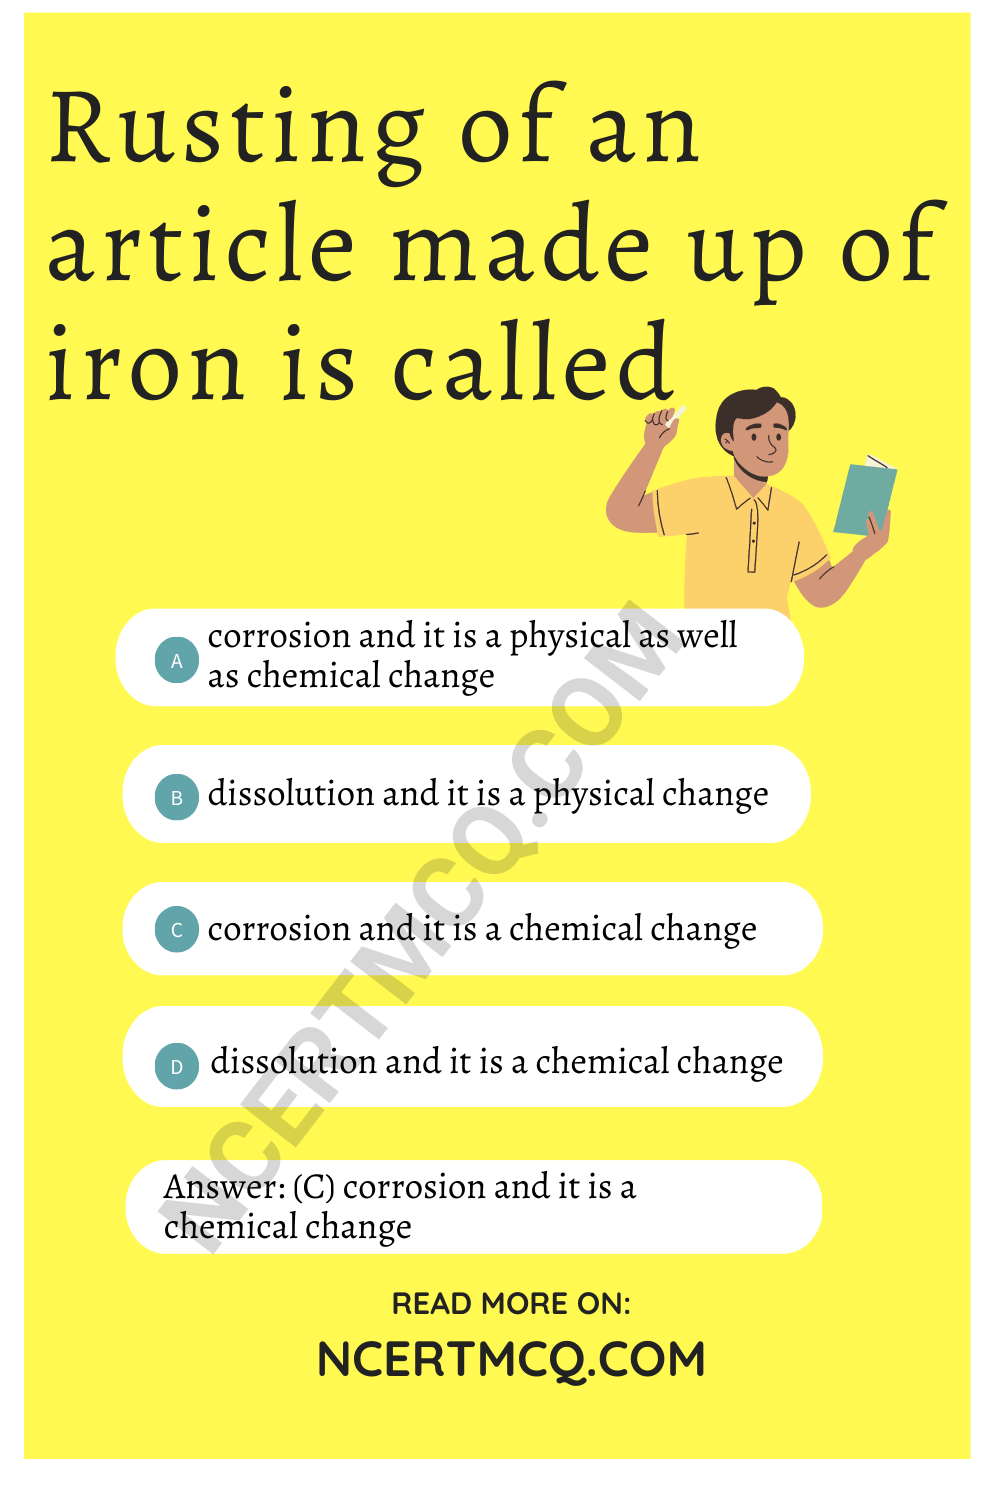 Rusting of an article made up of iron is called